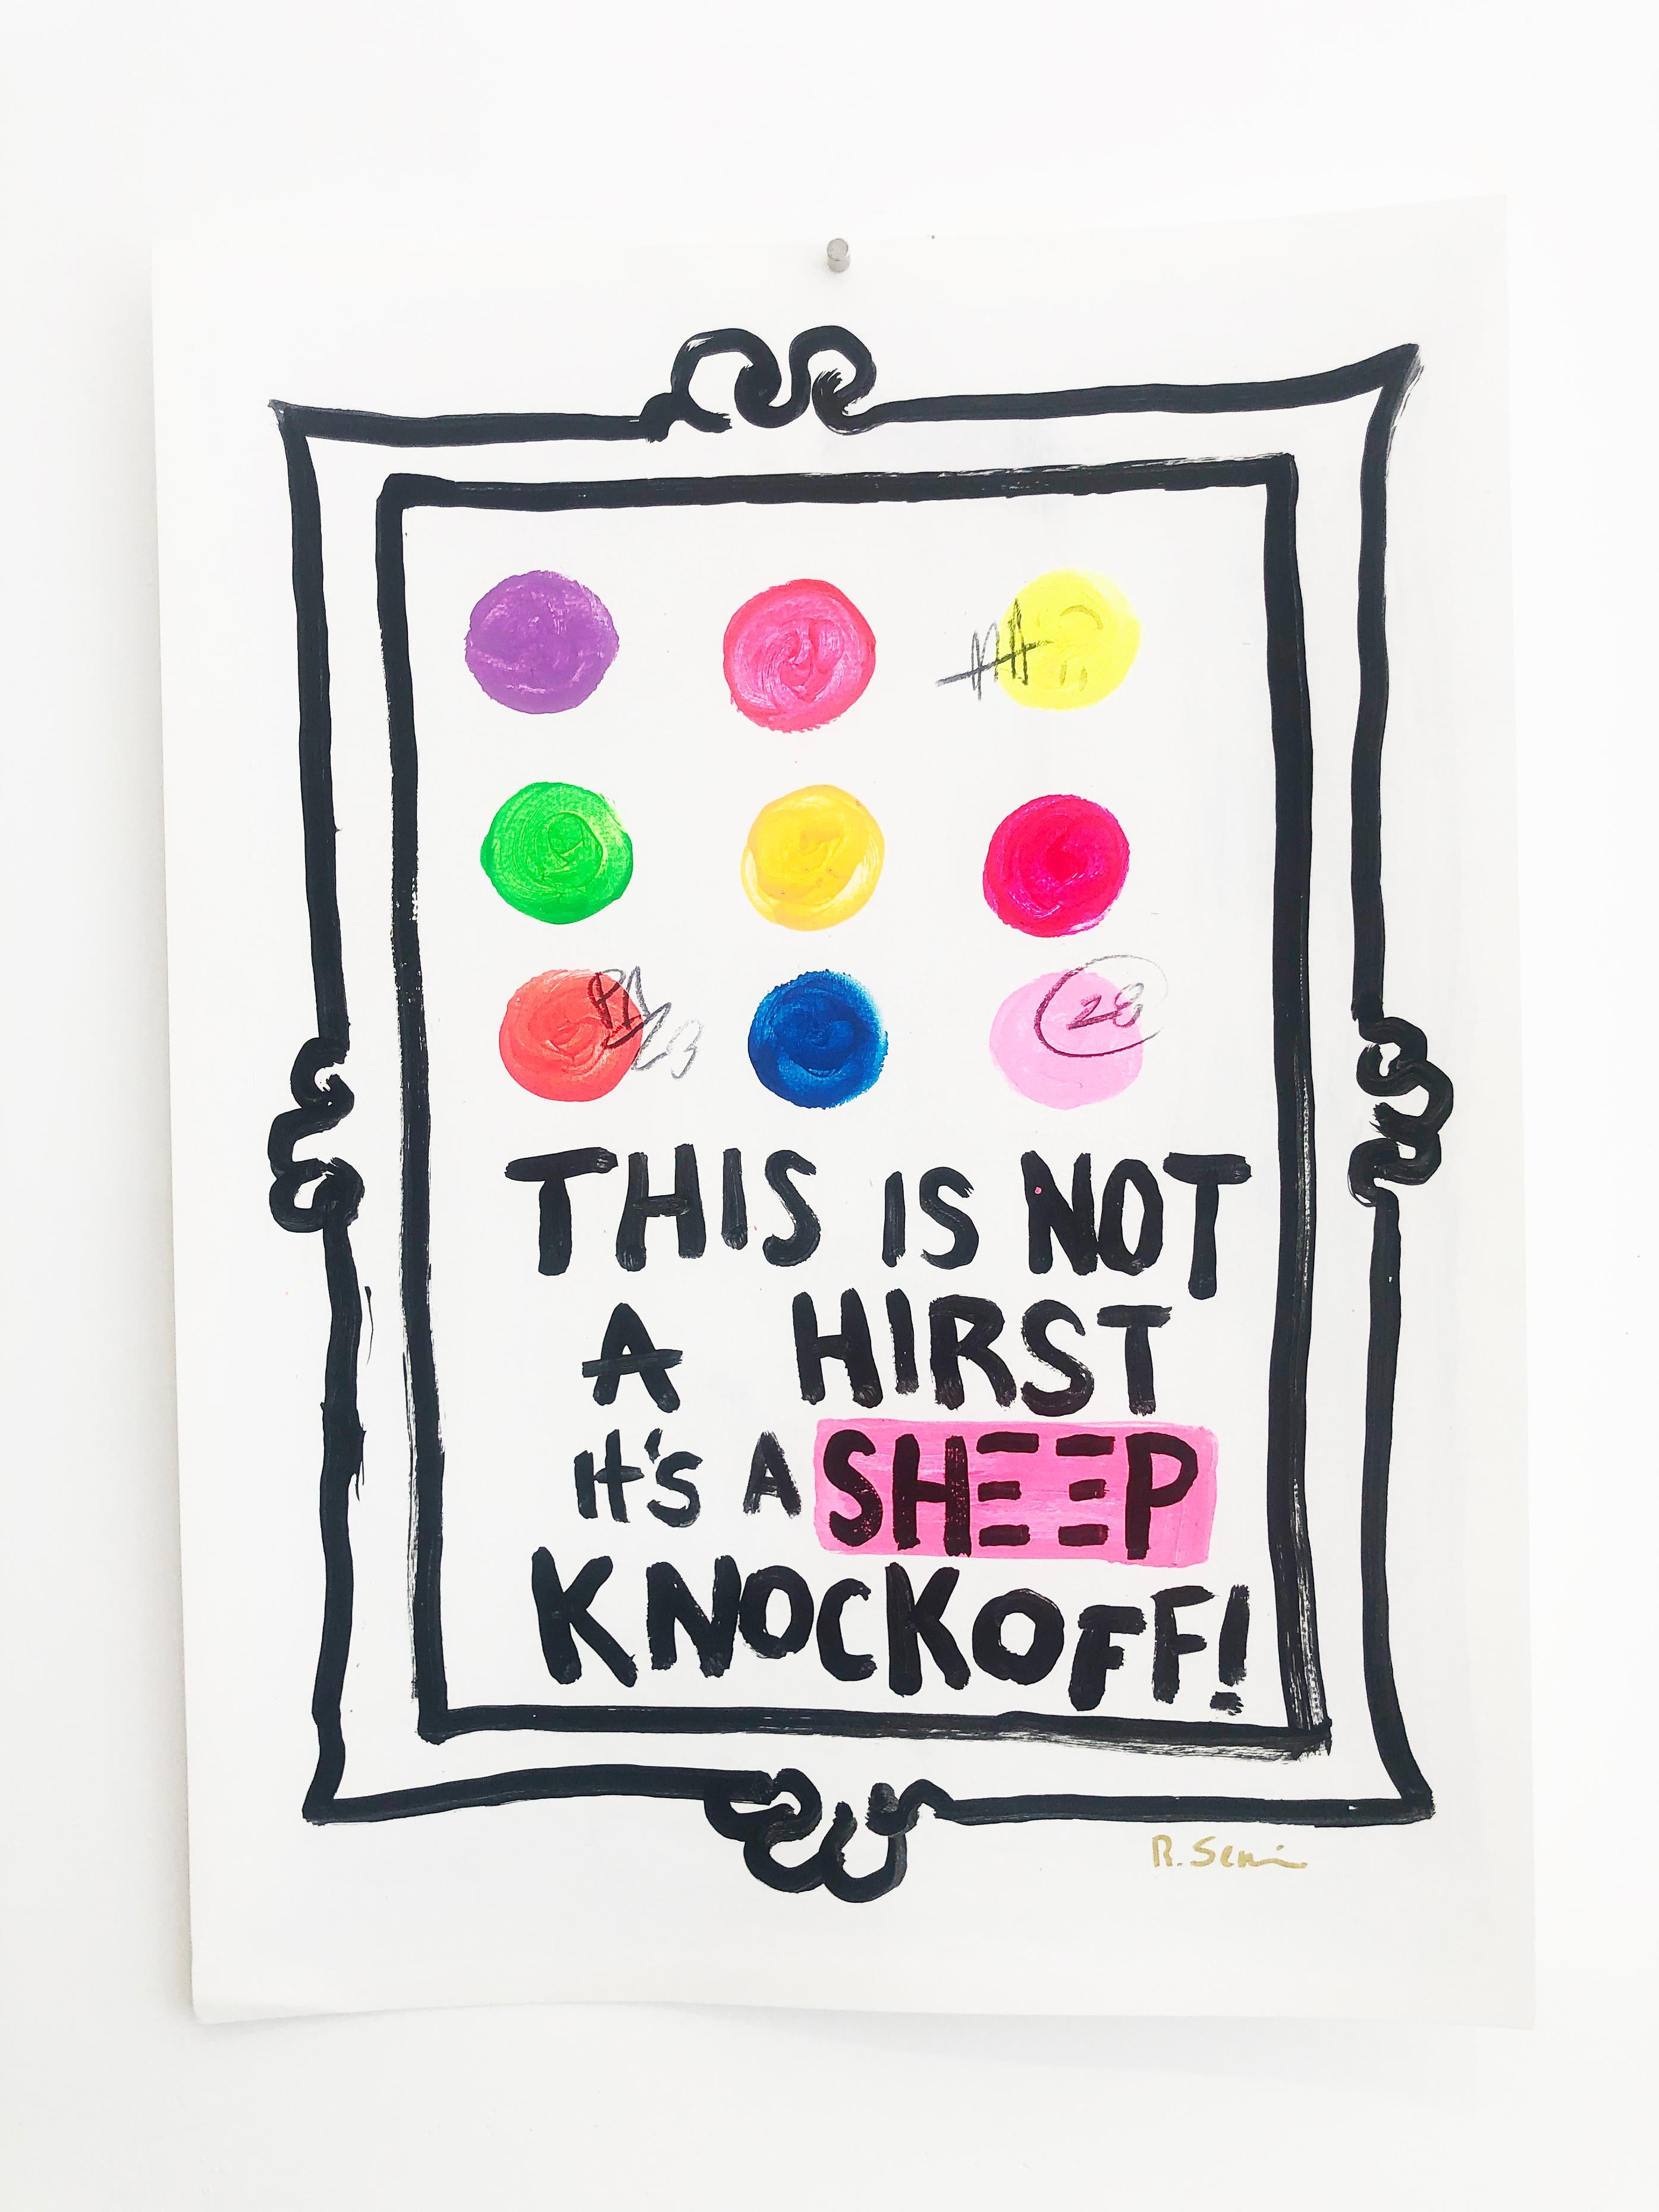 It's a Knockoff - Damien Hirst  acrylic on paper - Painting by Little Ricky